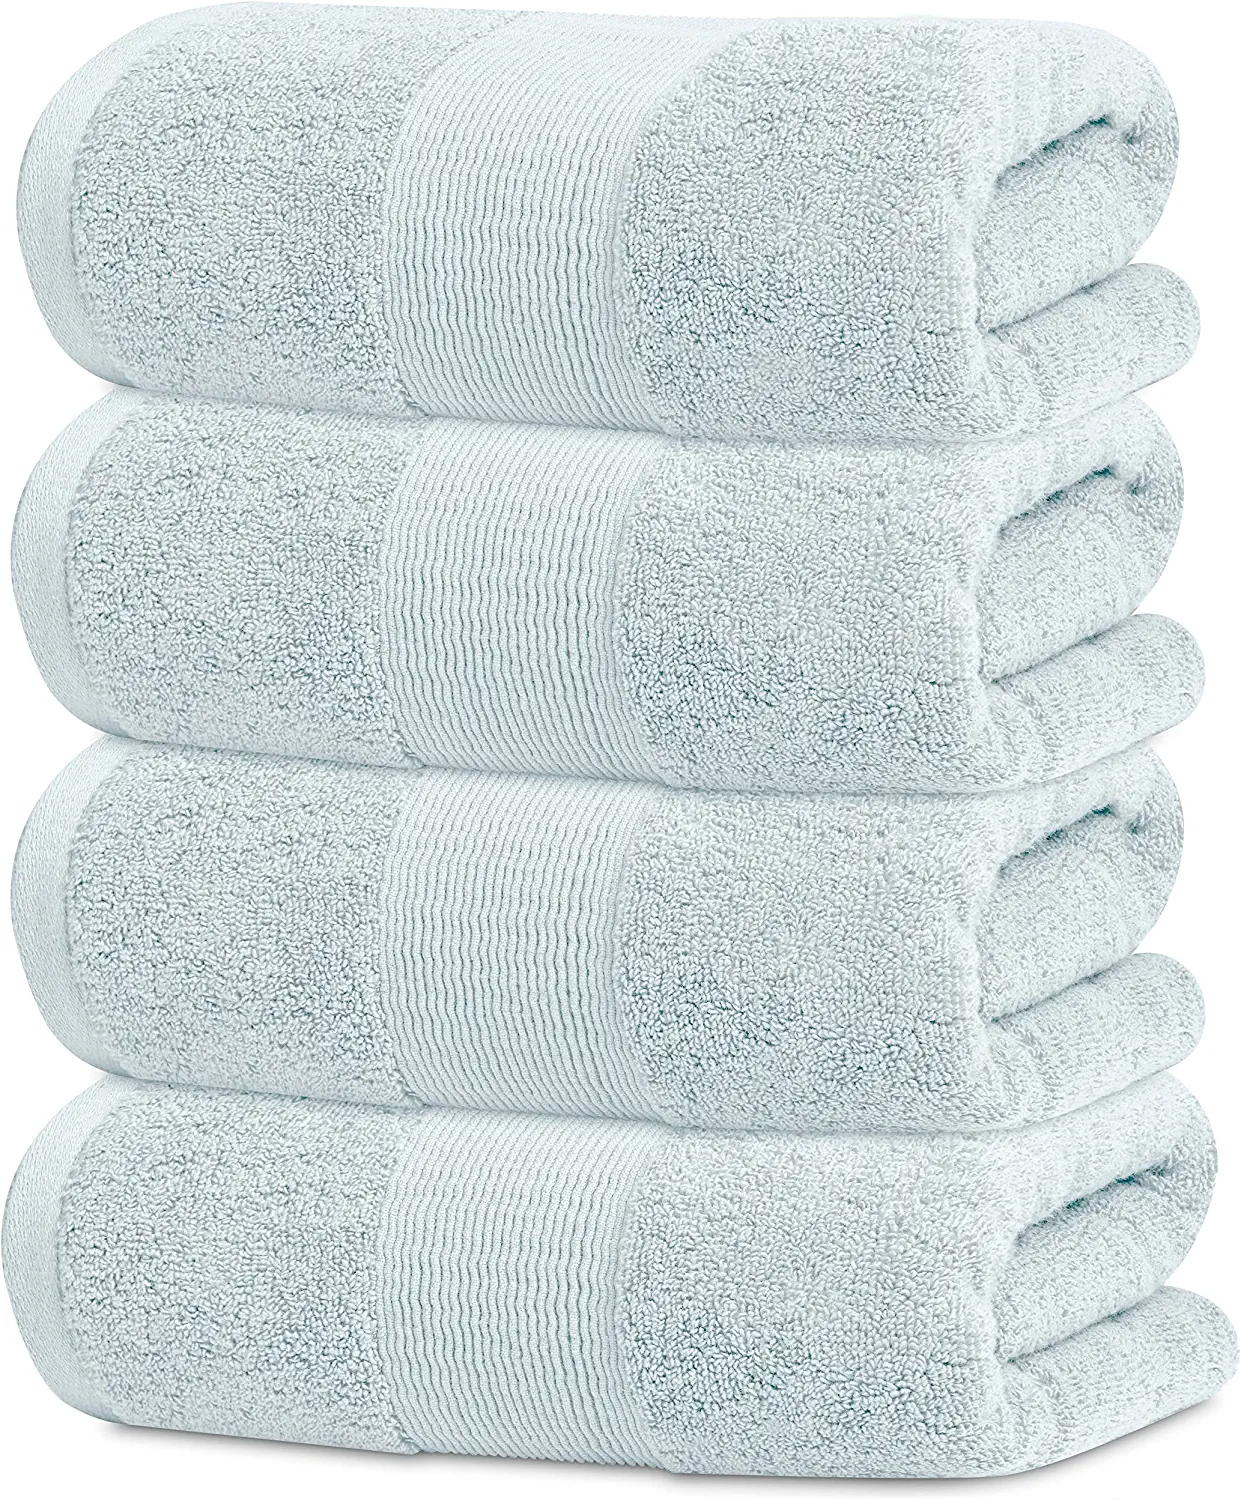 Resort Collection Soft Washcloth Face & Body Towel Set | 12x12 Luxury Hotel Plush & Absorbent Cotton Wash Clothes [12 Pack, Blue], Size: 12x12 